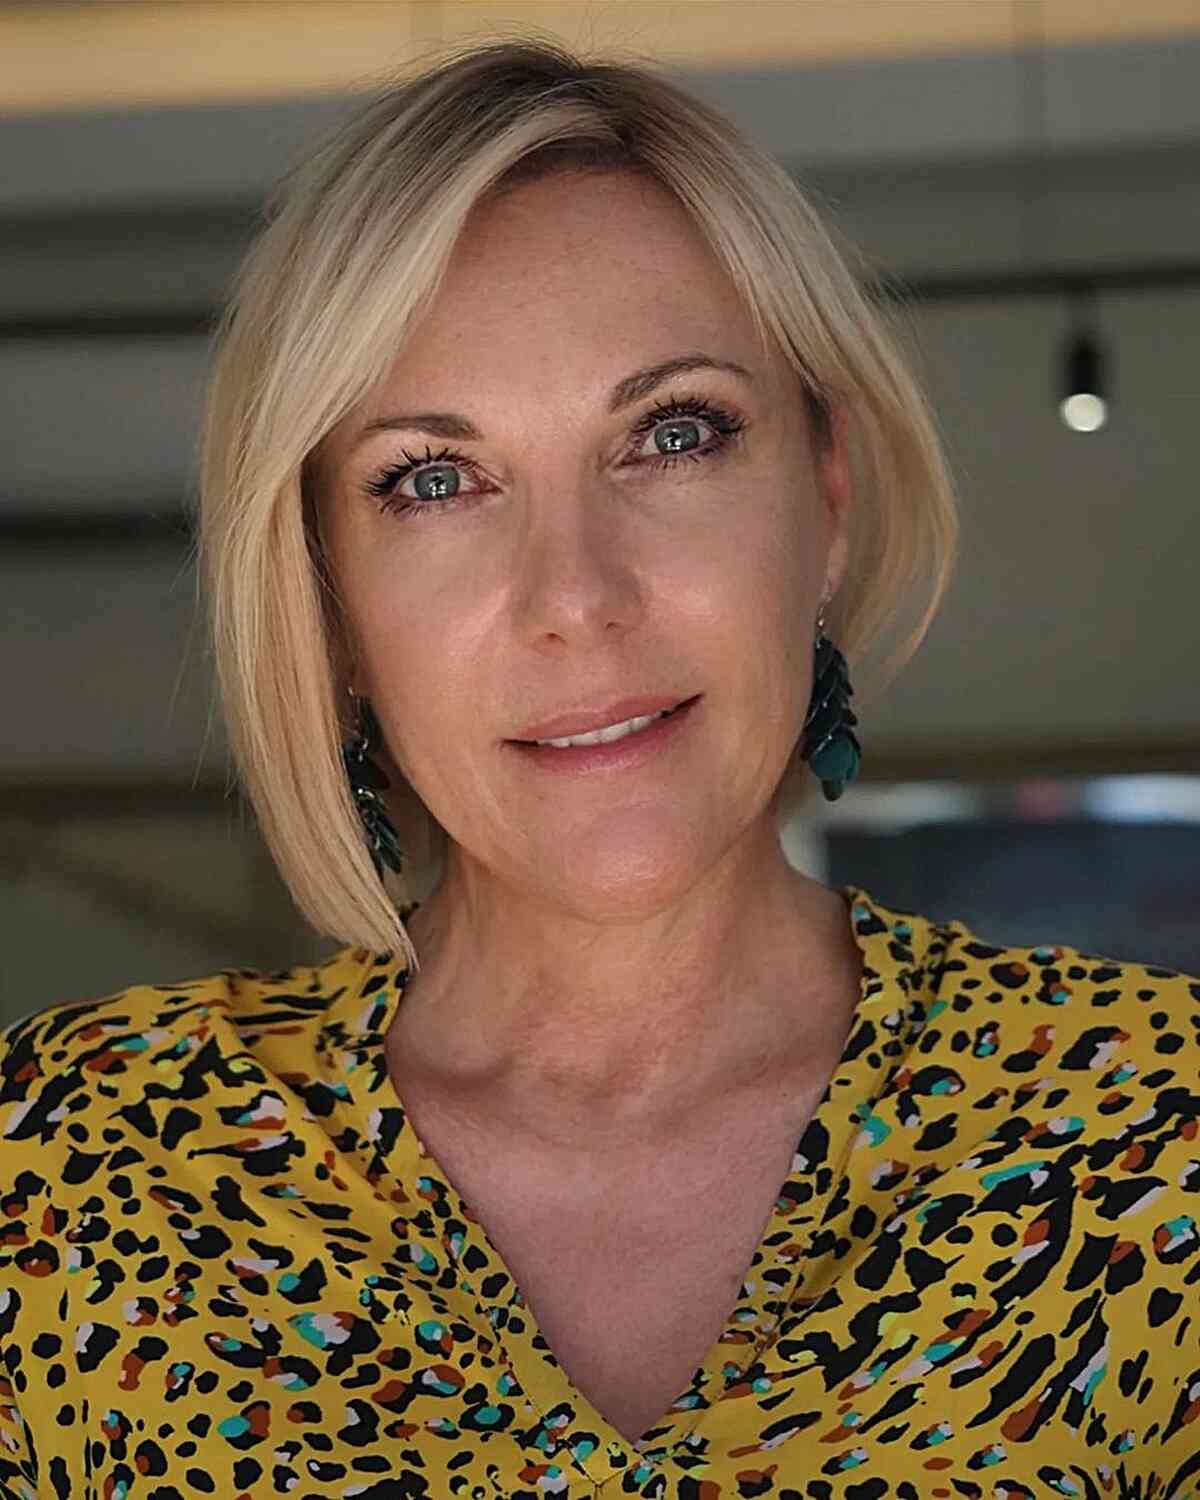 Short Side-Parted Blonde Asymmetric Bob for women over 50 with fine hair